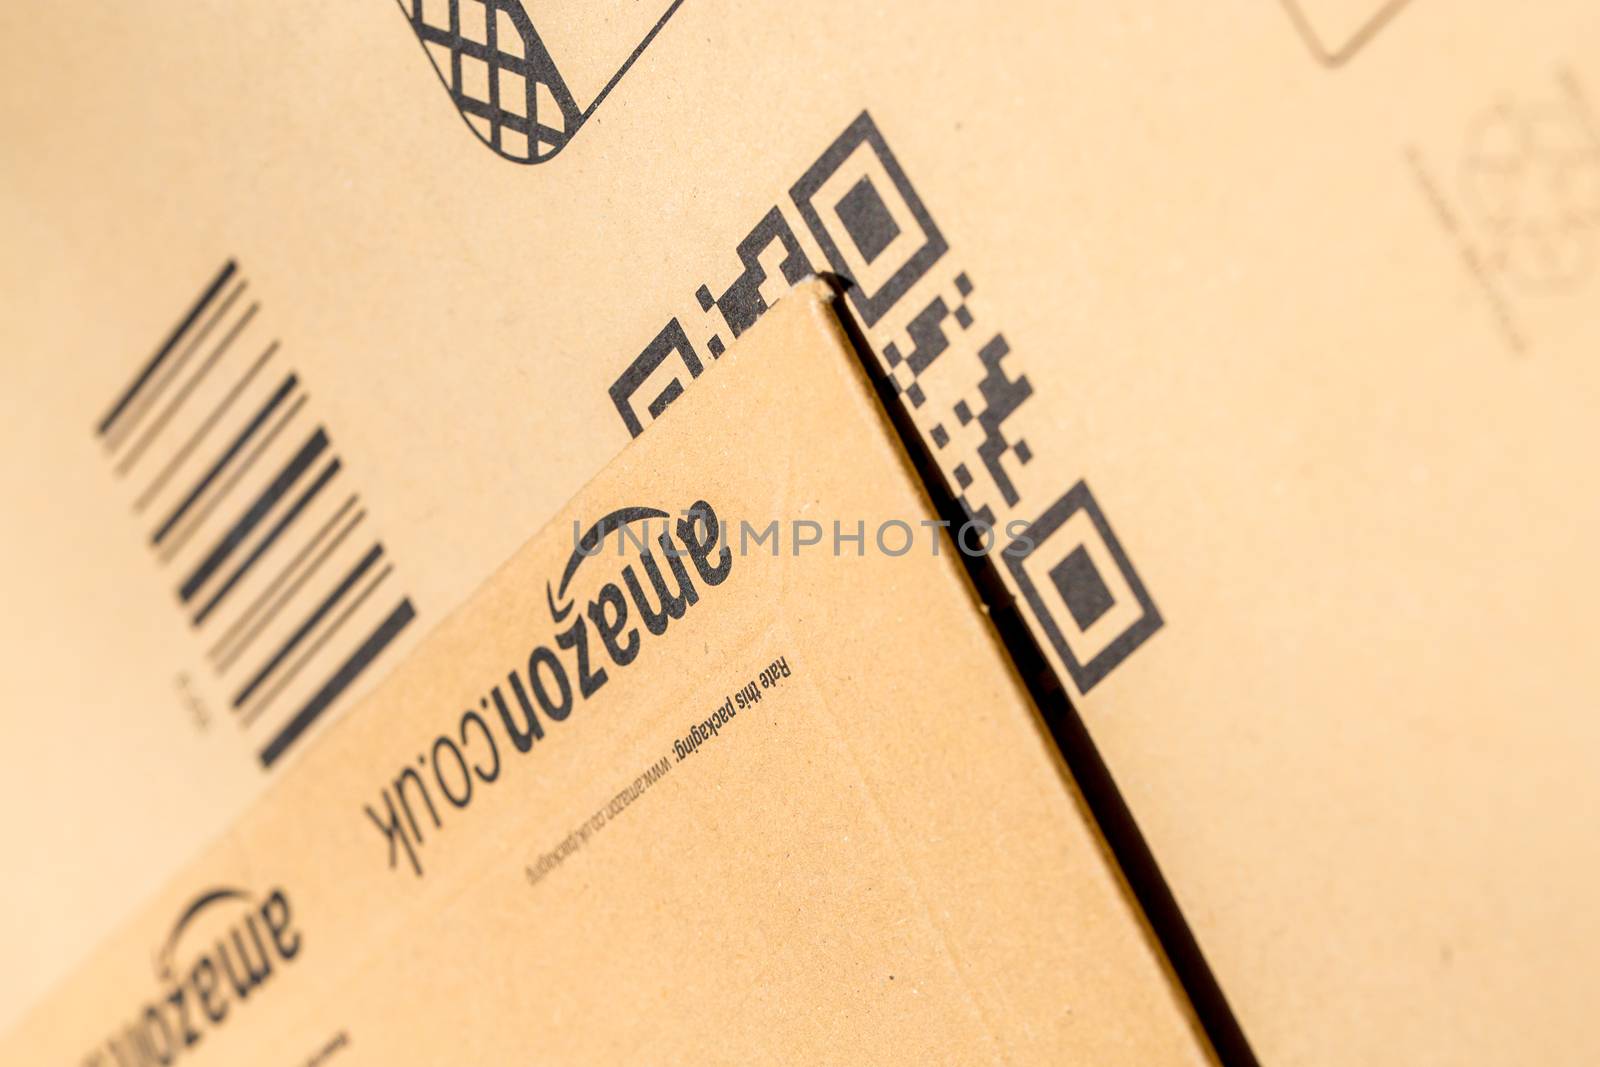 Paris, France - February 08, 2017: Amazon Prime Parcel Packages closeup. Amazon, is an American electronic commerce and cloud computing company,based in Seattle, Started as an online bookstore, Amazon is become the most importrant retailer in the United States